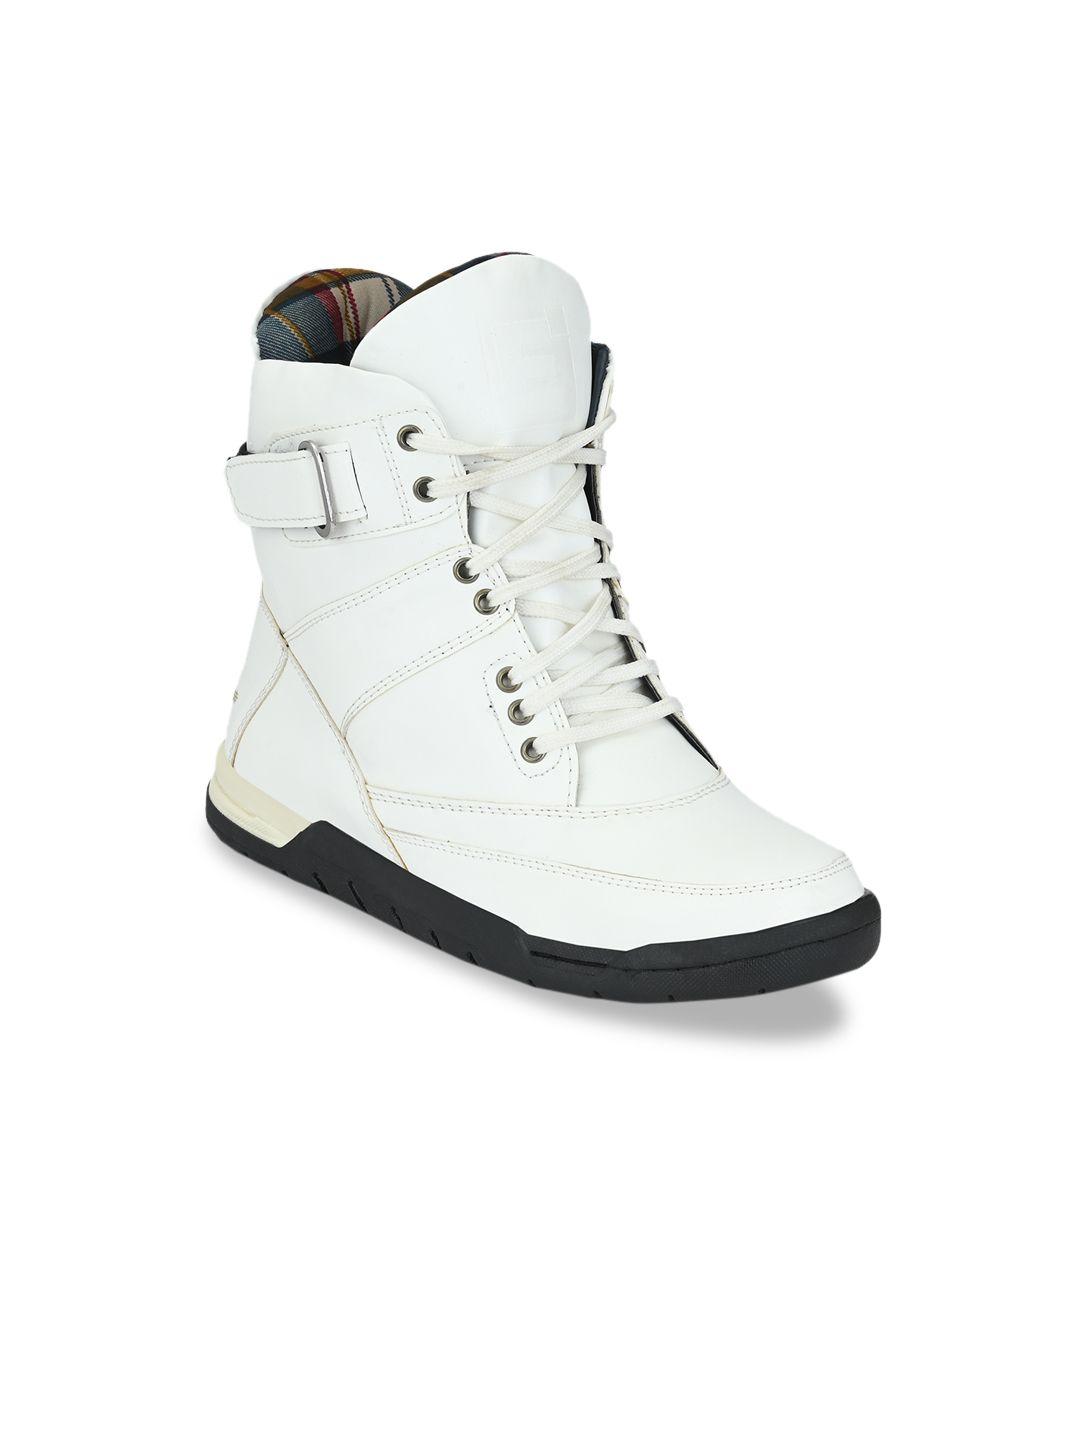 eego italy men white solid synthetic leather high-top sneakers